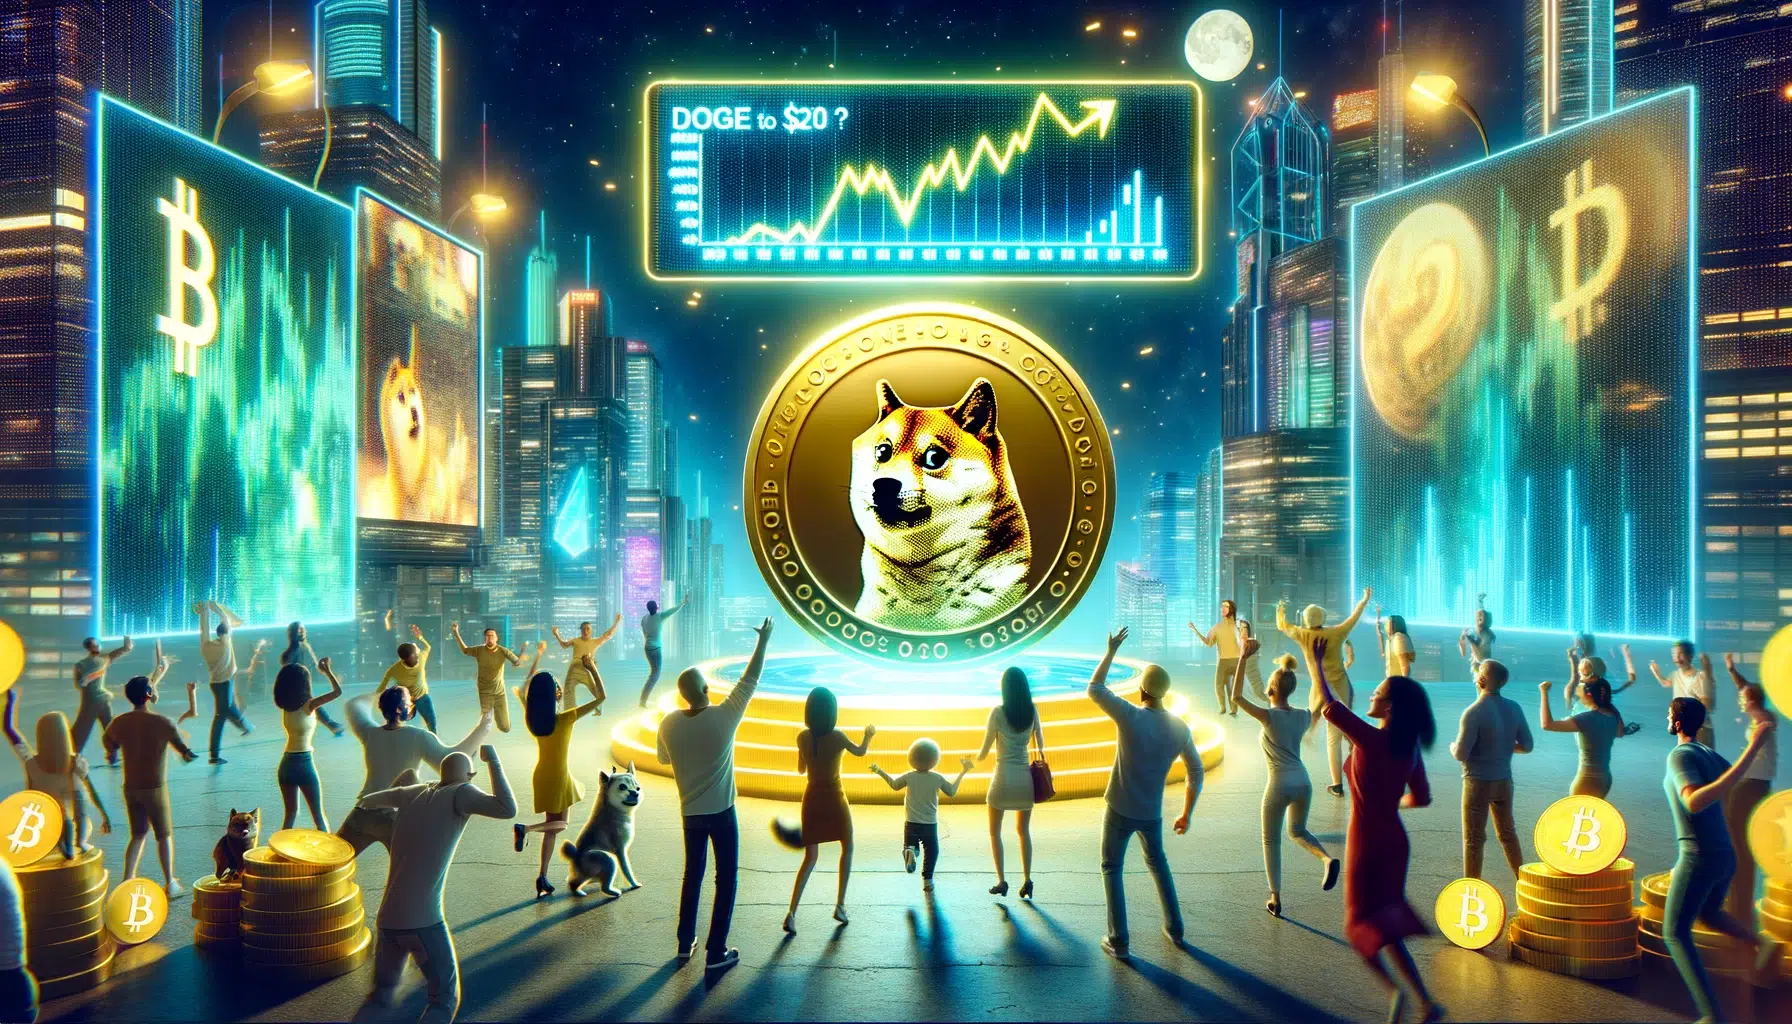 Elon Musk’s Latest Dogecoin Meme Prepares Price for Possible Surge – Can DOGE Hit $0.20?